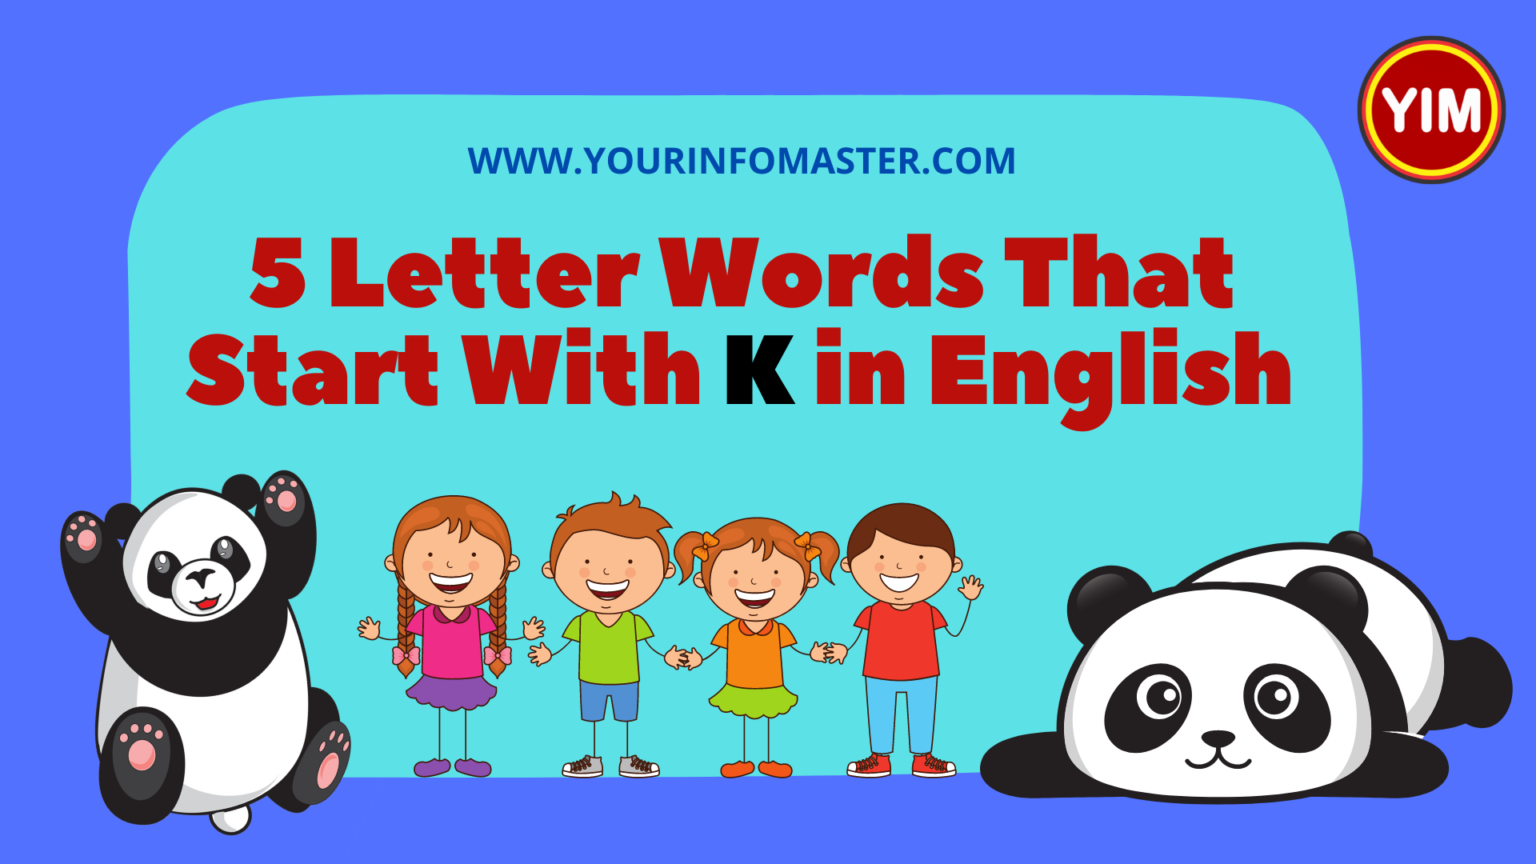 5-letter-words-starting-with-k-english-vocabulary-your-info-master